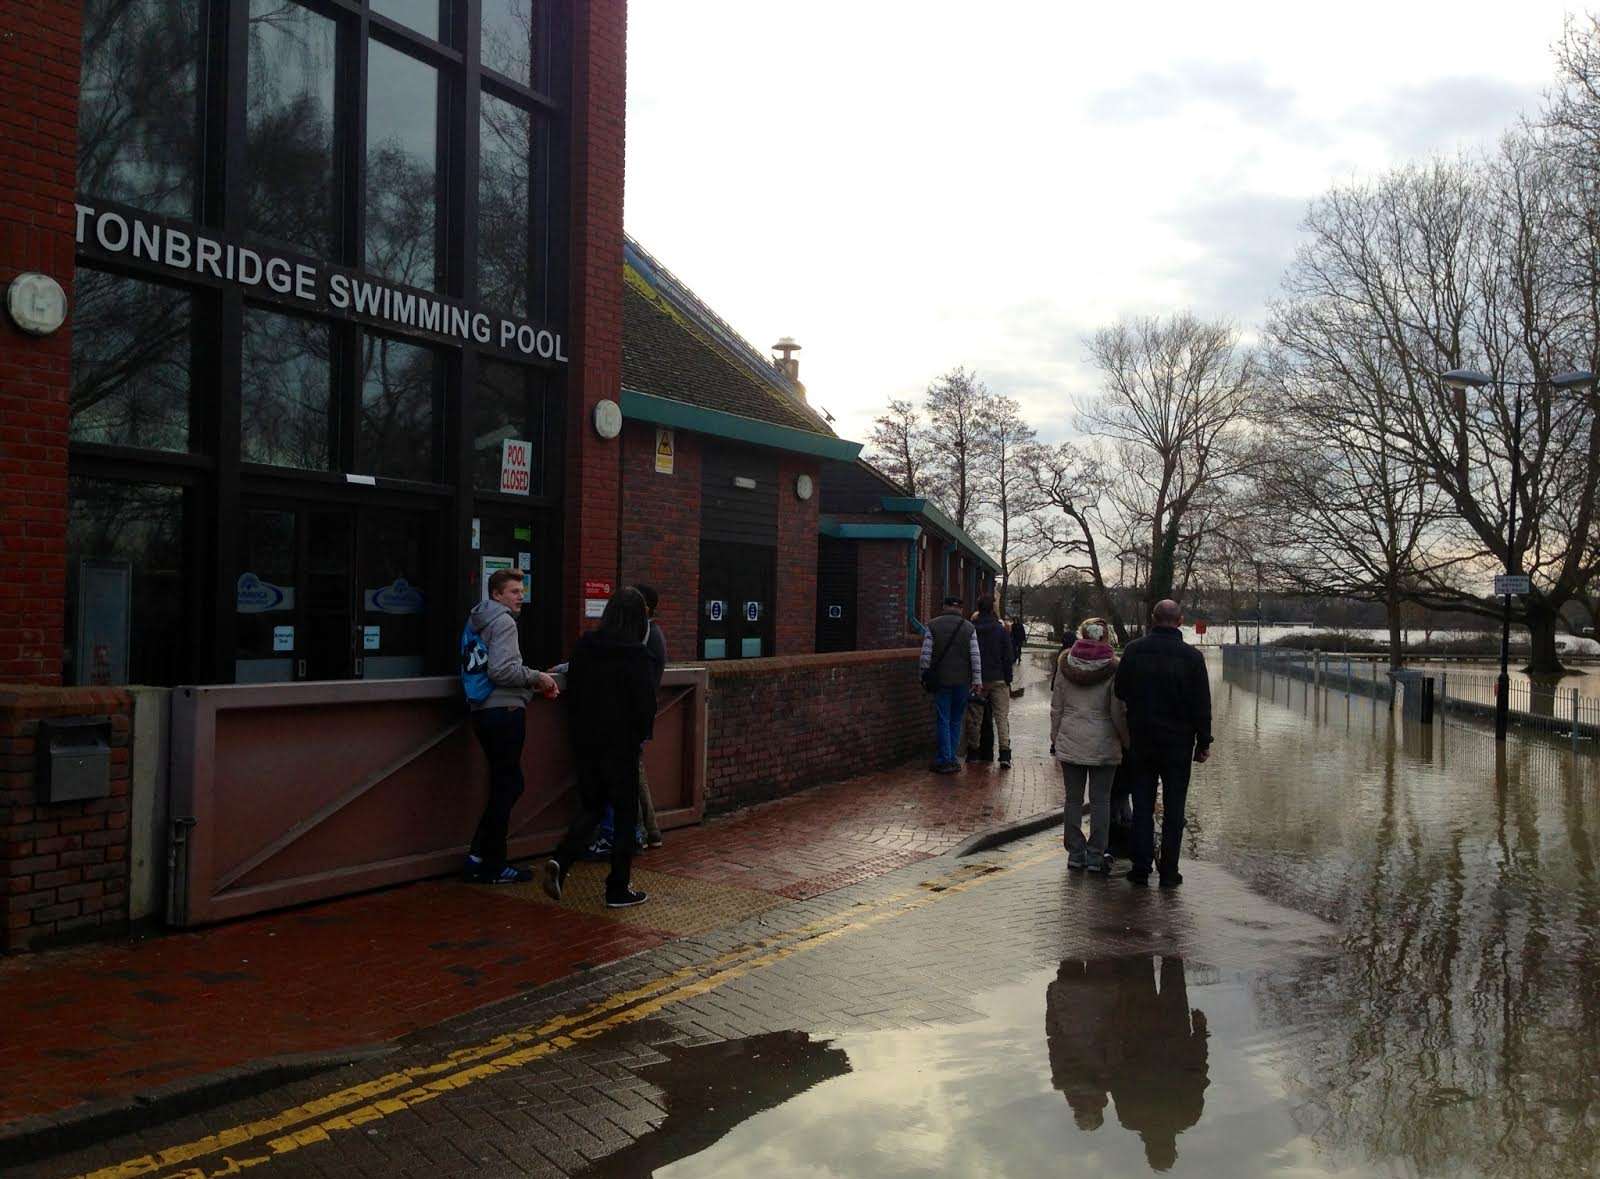 A flood gate is in place in front of Tonbridge Swimming Pool as onlookers survey the latest flood. Picture by Matthew Walker